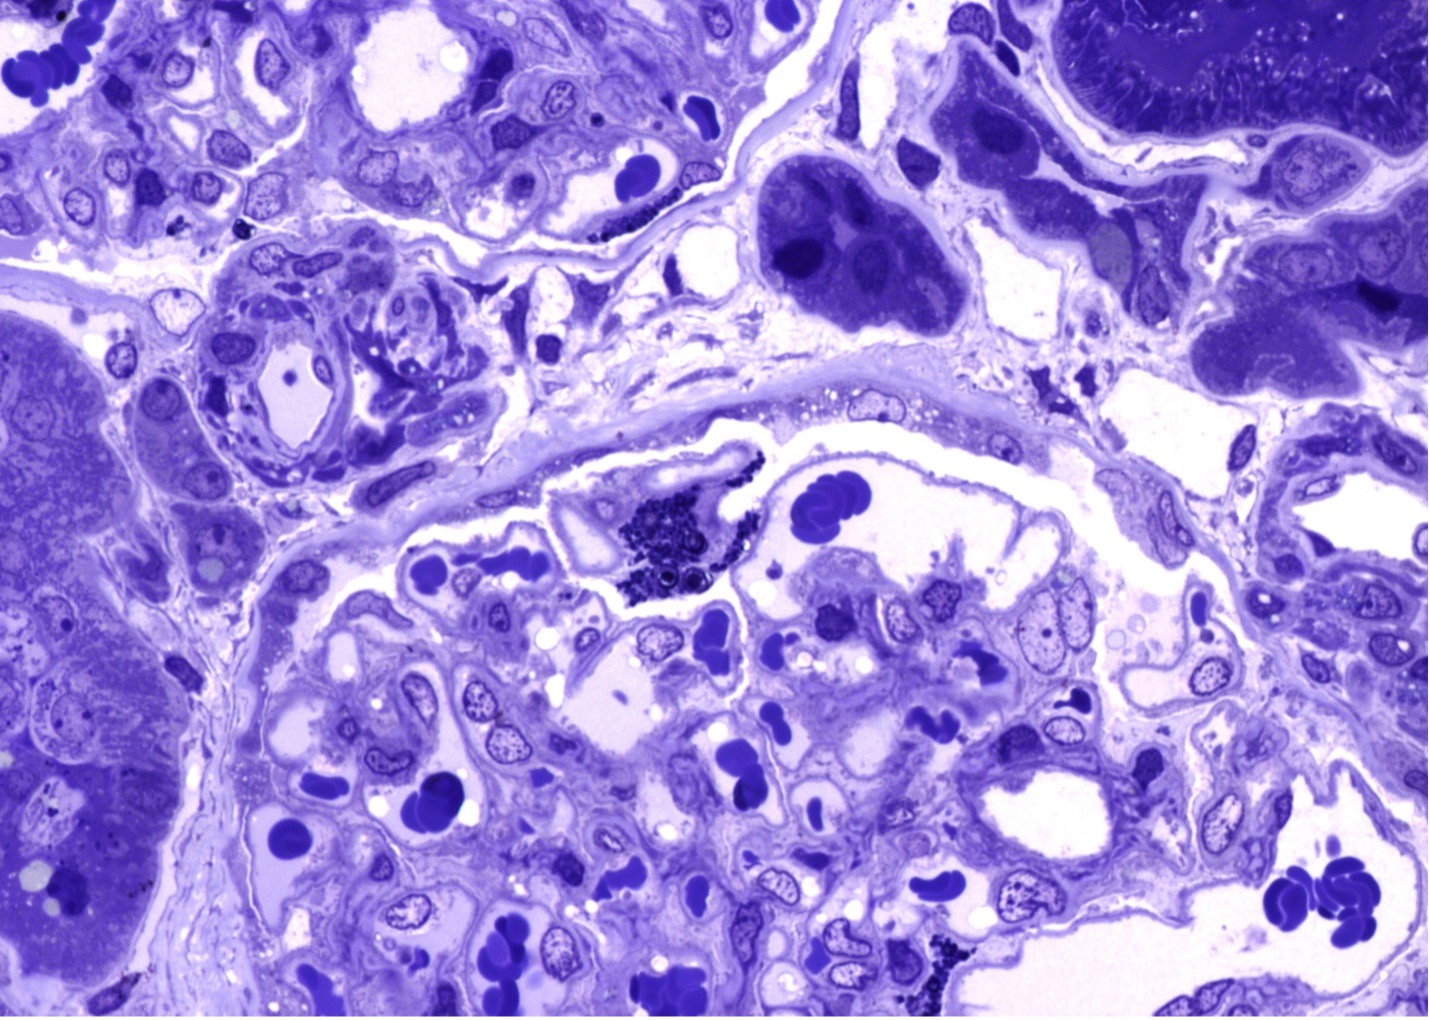 Figure 2 (Microscopic Photo, 400x) Segmental podocytes have prominent and expanded cytoplasm with round blue cytoplasmic droplets (arrows, toluidine blue stained one-micron thick sections).